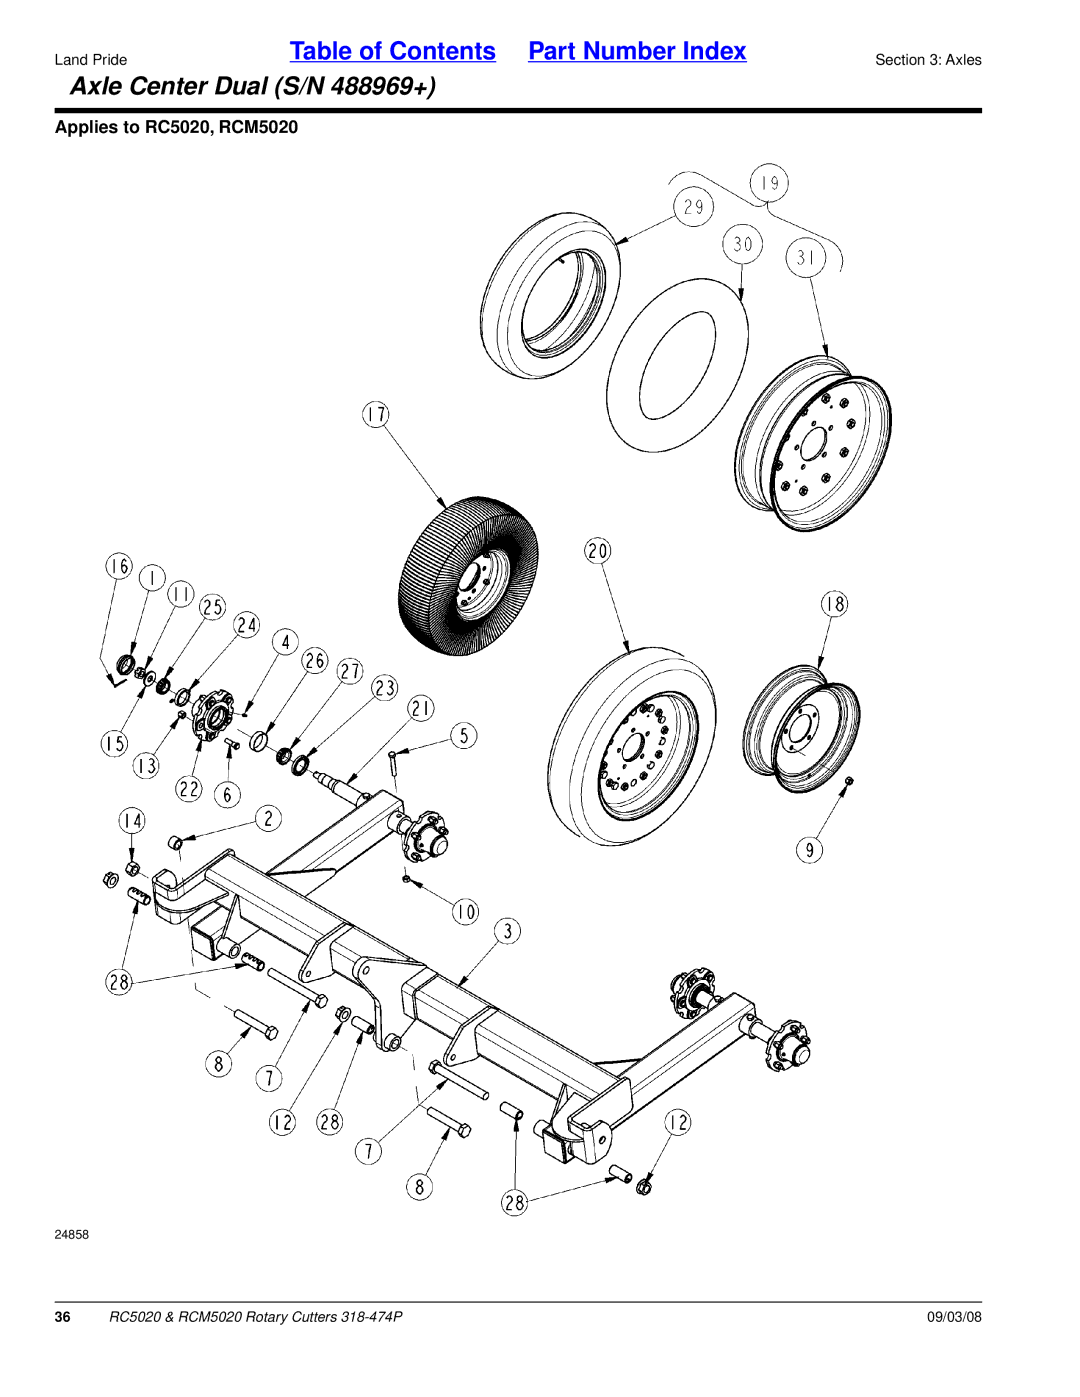 Land Pride RC5020 manual Axle Center Dual S/N 488969+ 